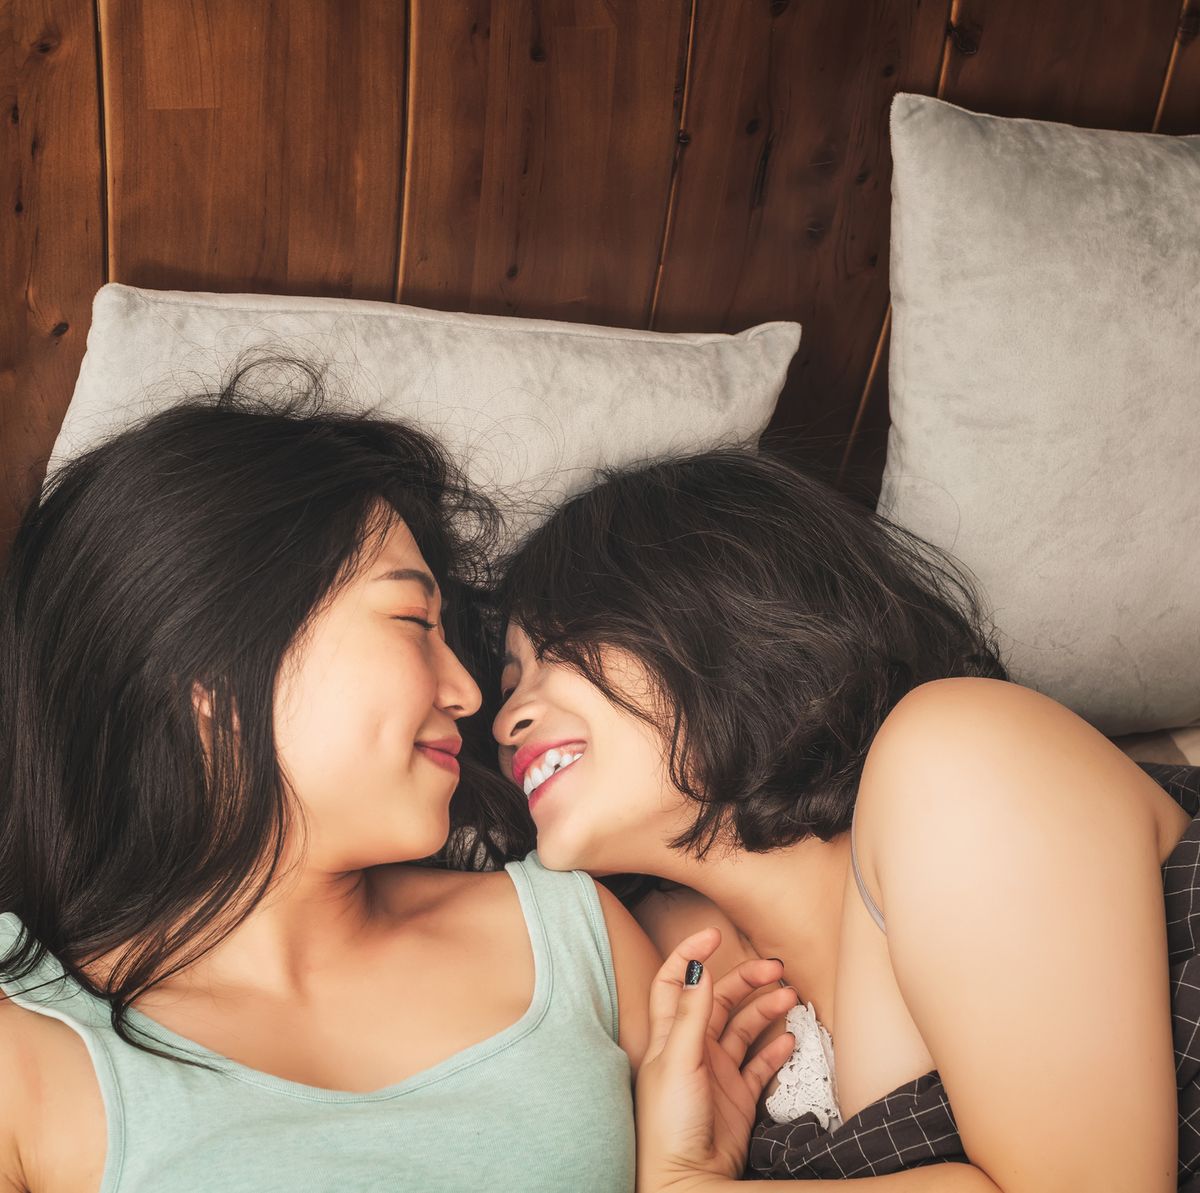 Sleeping Girl Ke Group Me Sex - Am I A Lesbian?' - 15 People Share How They Knew Their Sexuality